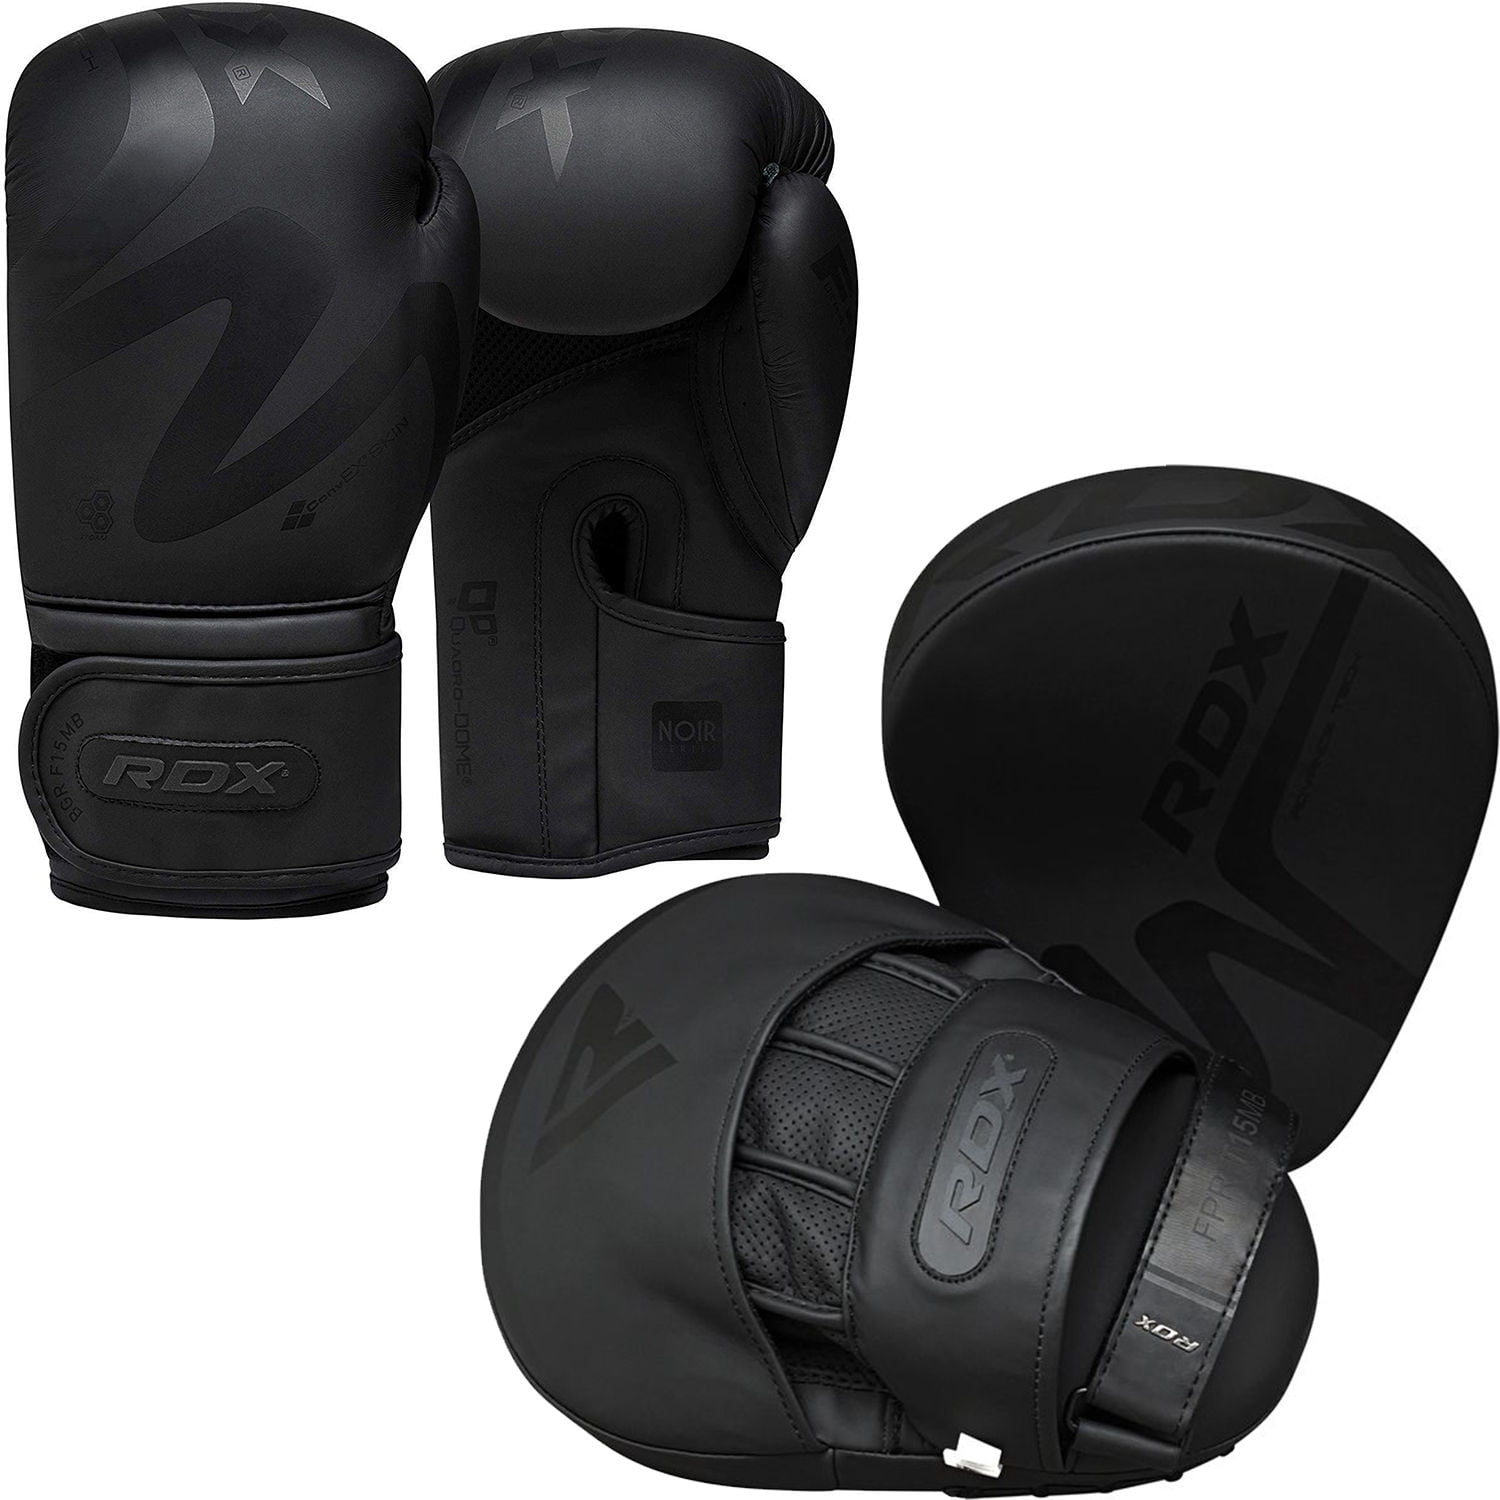 Foam Boxer Training Fitness Supplies Boxing Punch Glove Target Pads Mma Training Gloves Ruidada Boxing Paddles Mitts